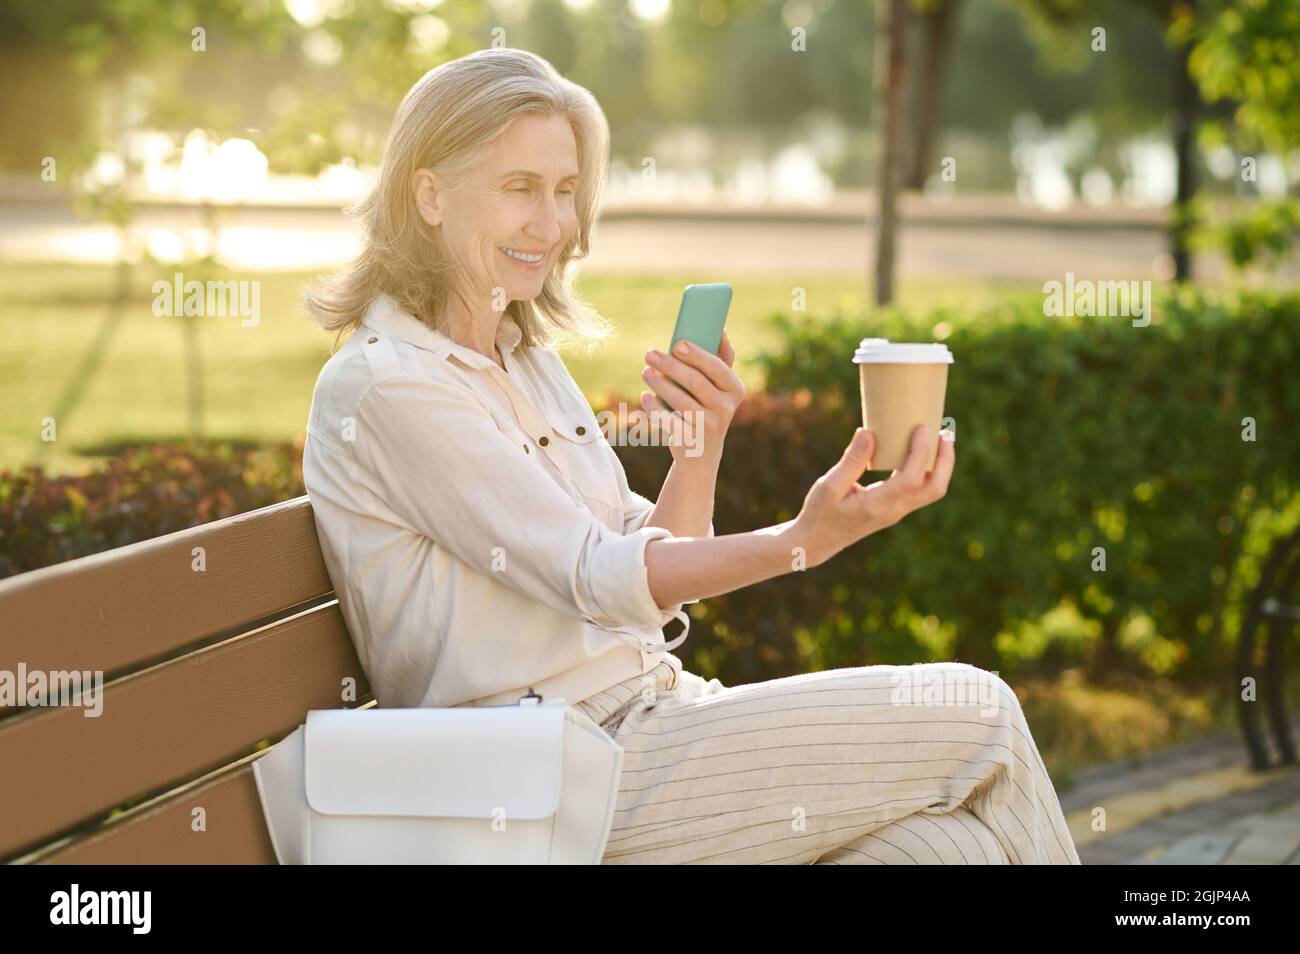 Woman with smartphone and glass of coffee Stock Photo